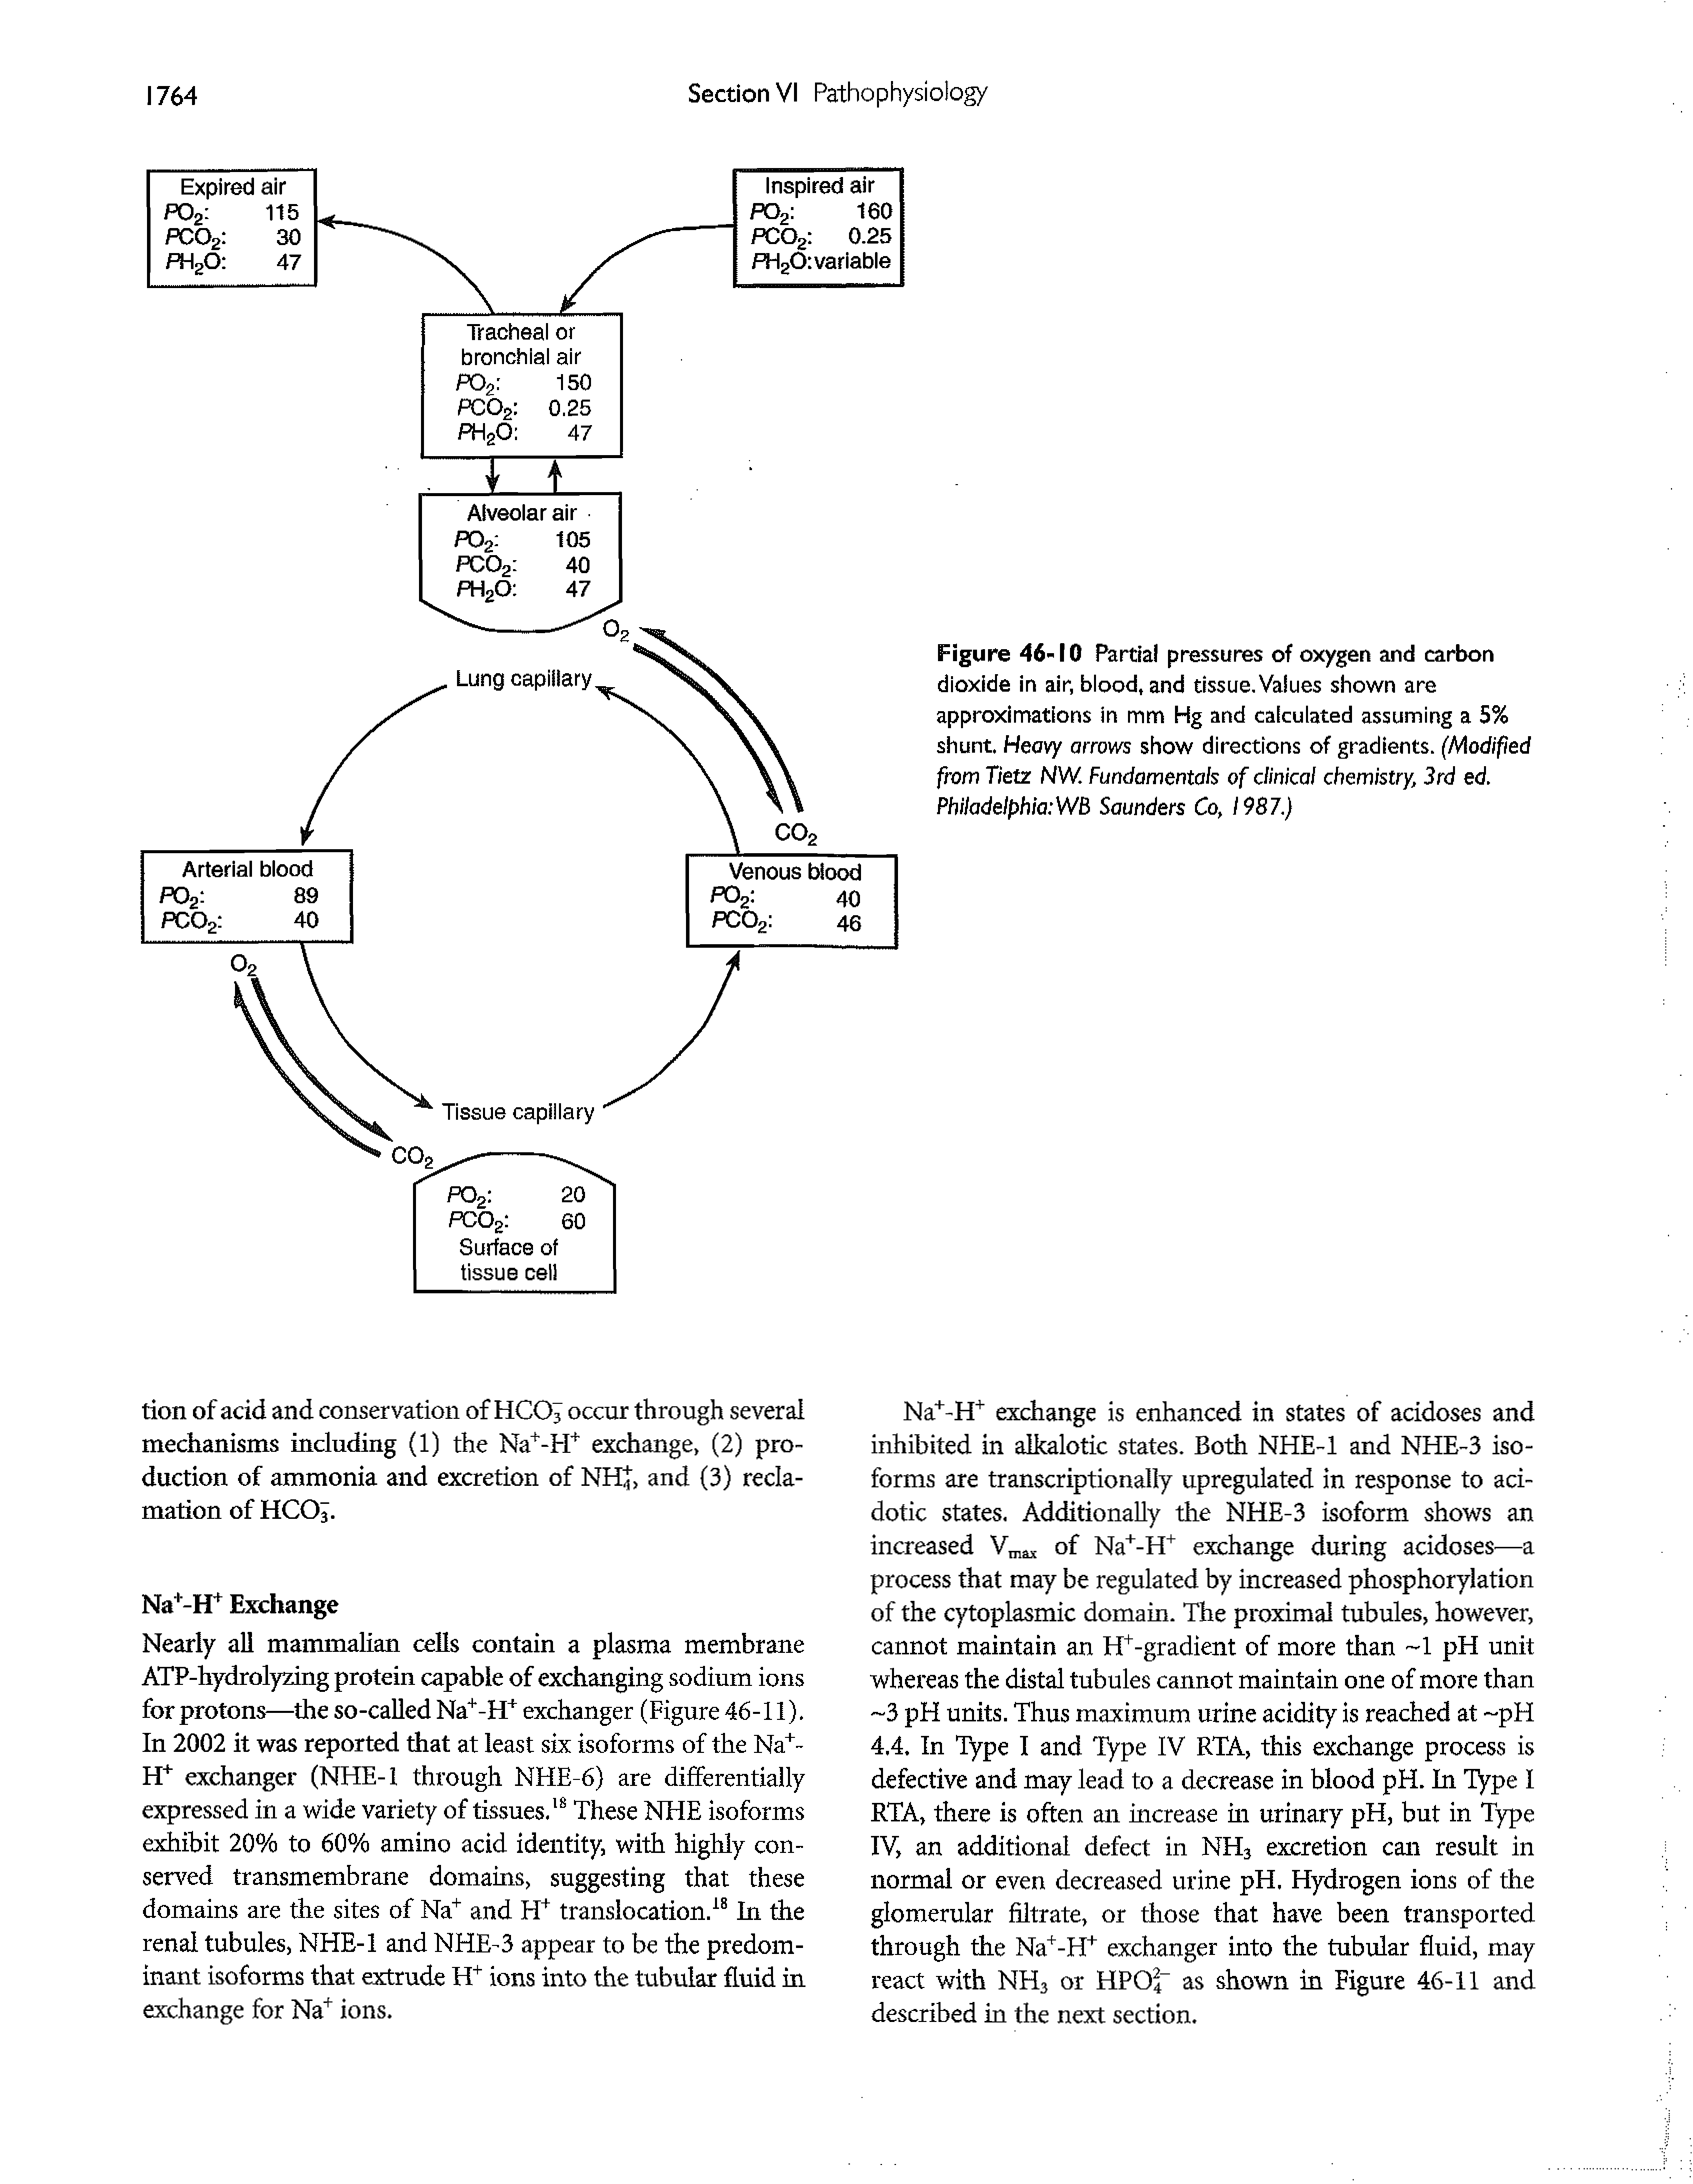 Figure 46-10 Partial pressures of oxygen and carbon dioxide in air, blood, and tissue. Values shown are approximations in mm Hg and calculated assuming a 5% shunt. Heavy arrows show directions of gradients. (Modified from Tietz NW. Fundamentals of clinical chemistry, 3rd ed. Philadelpbla WB Saunders Co, 1987.)...